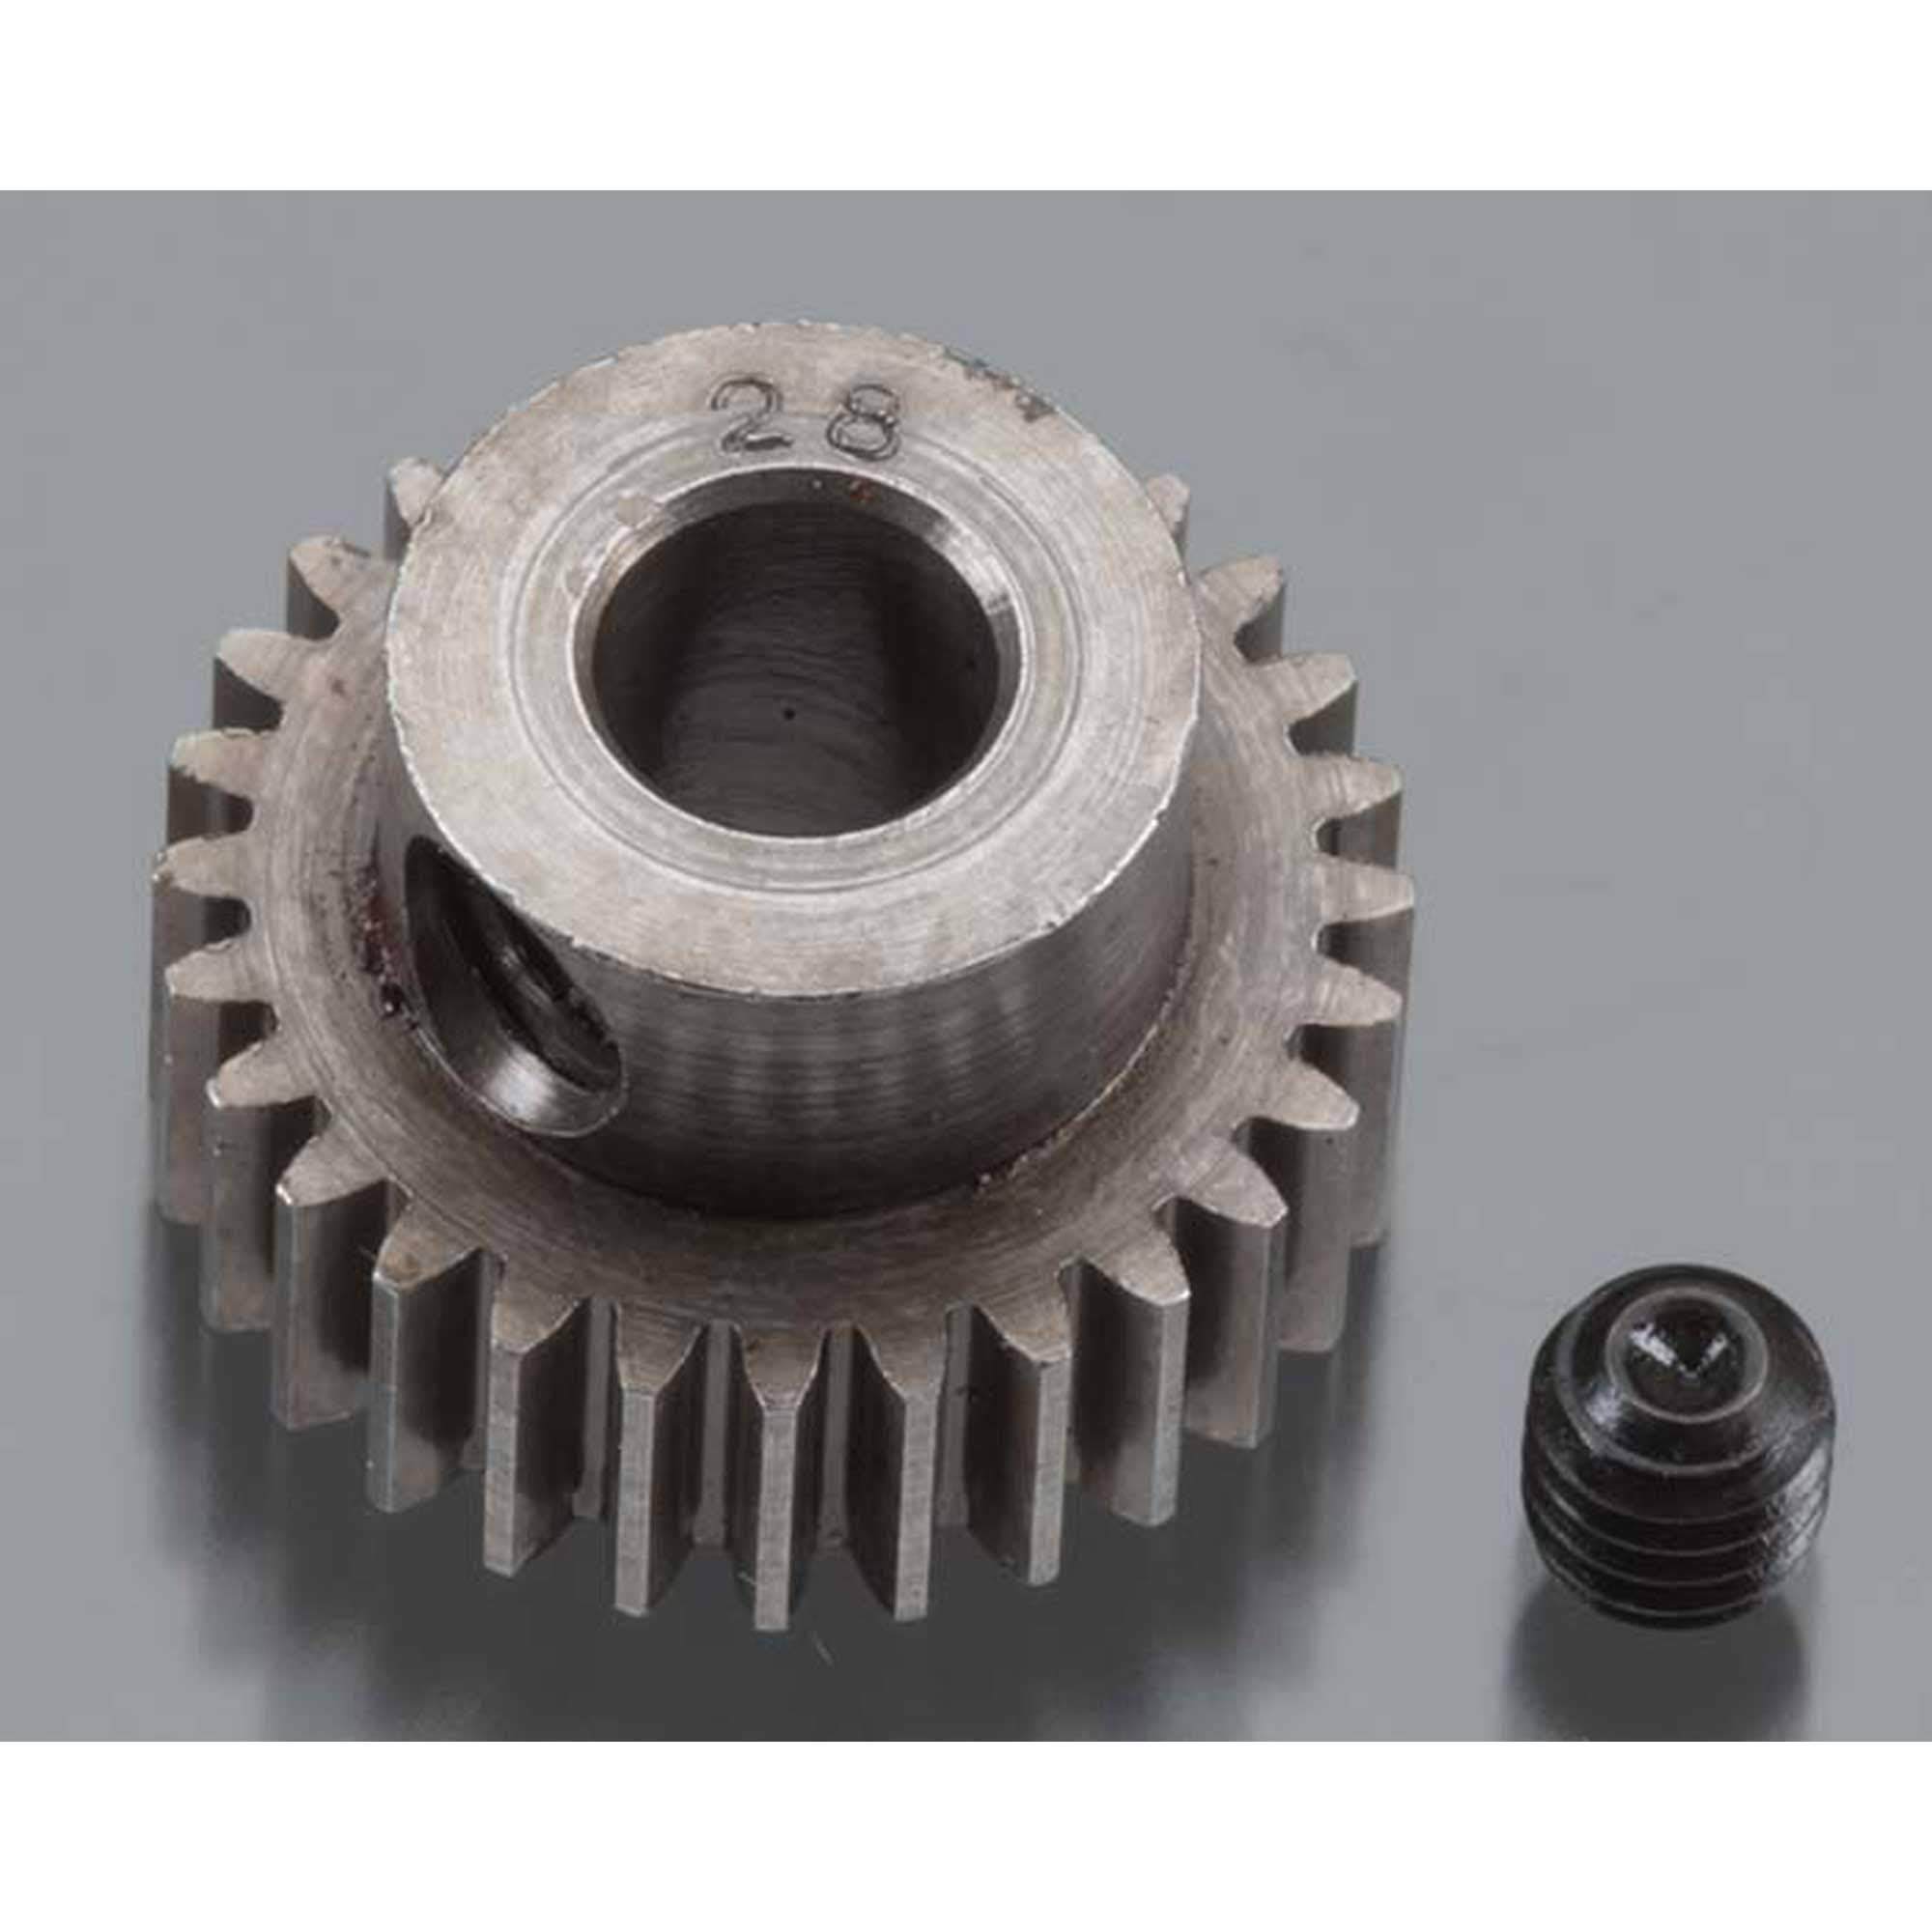 Robinson Racing Rc Model Vehicle Parts 48 Pitch Pinion Gear - 28t